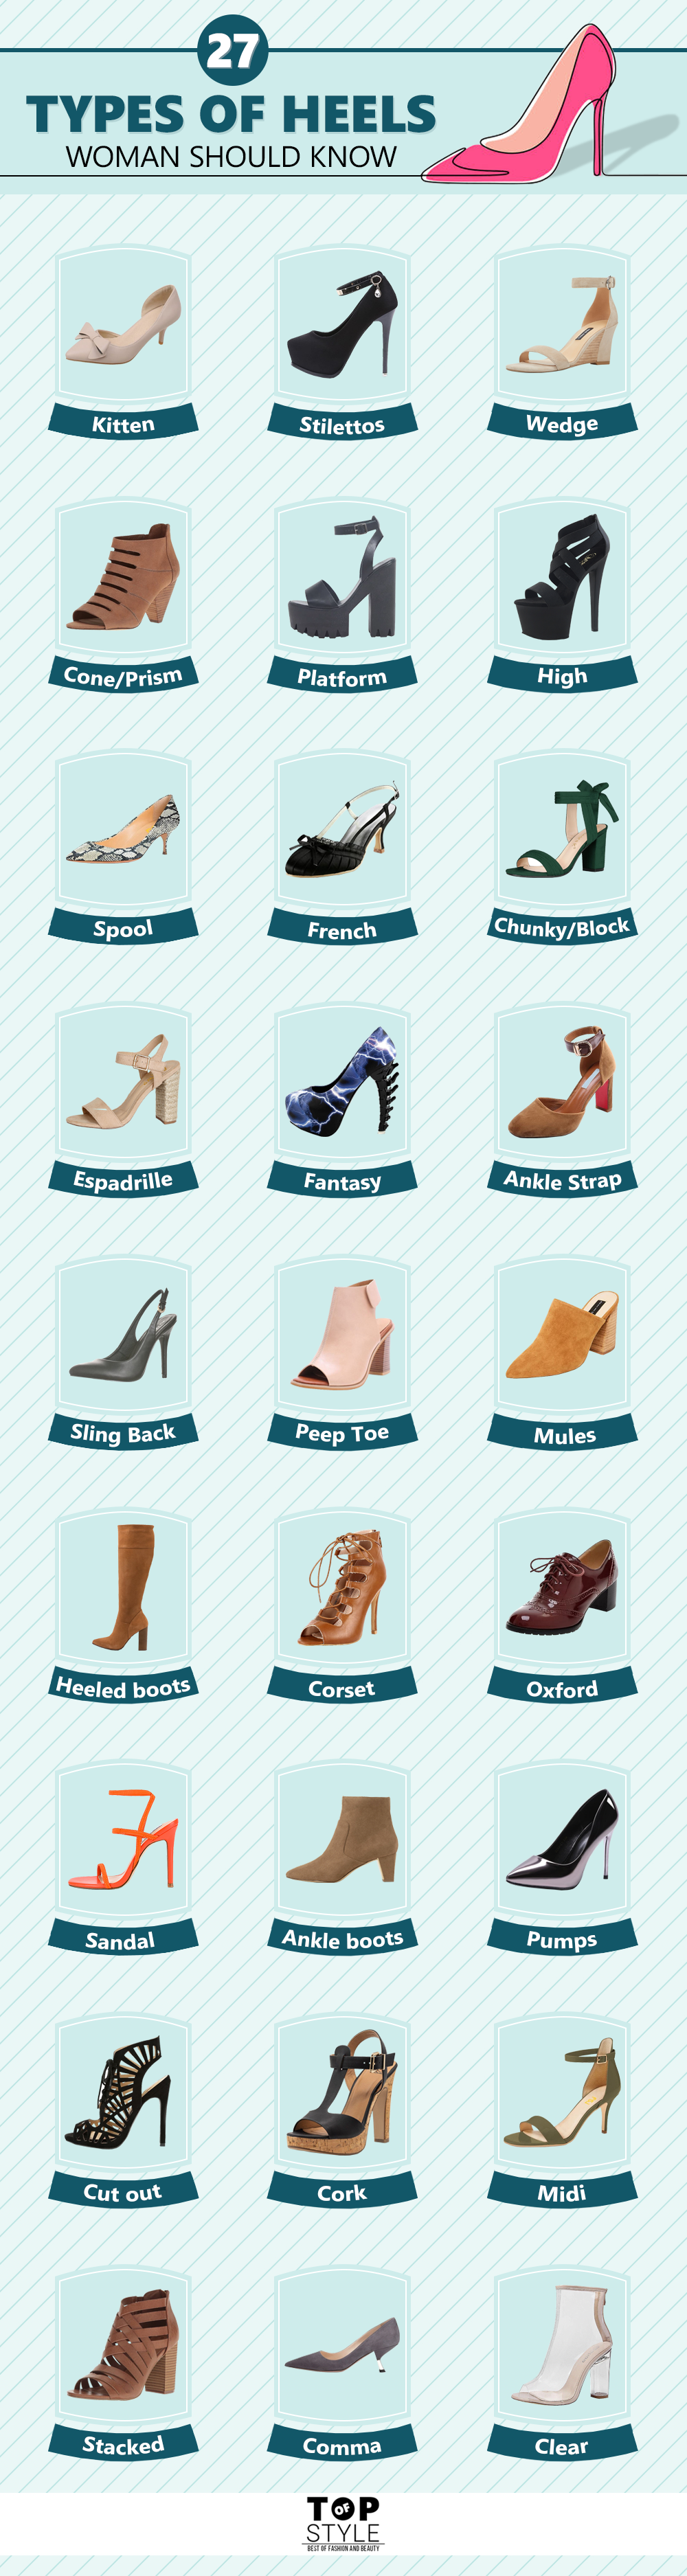 Types of Heels: Different Types of Heels with Their Names | Heels/Sandal  Guide - YouTube